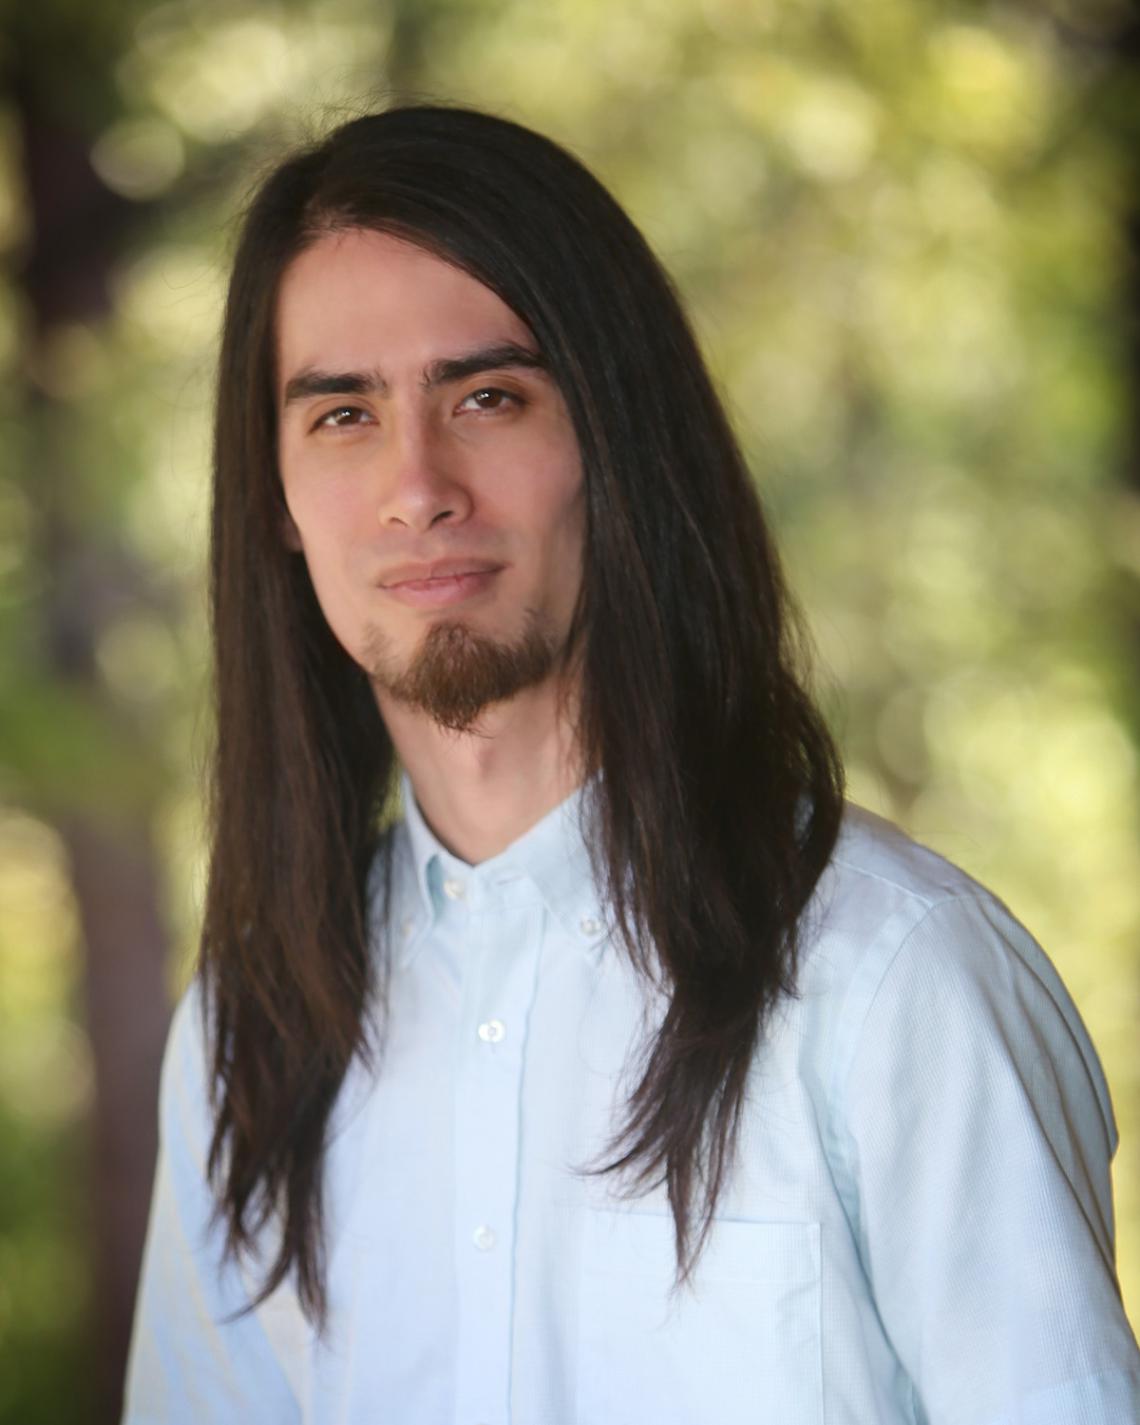 A game developer and programmer for several years, Alan is our resident expert in the Unity3D game engine.